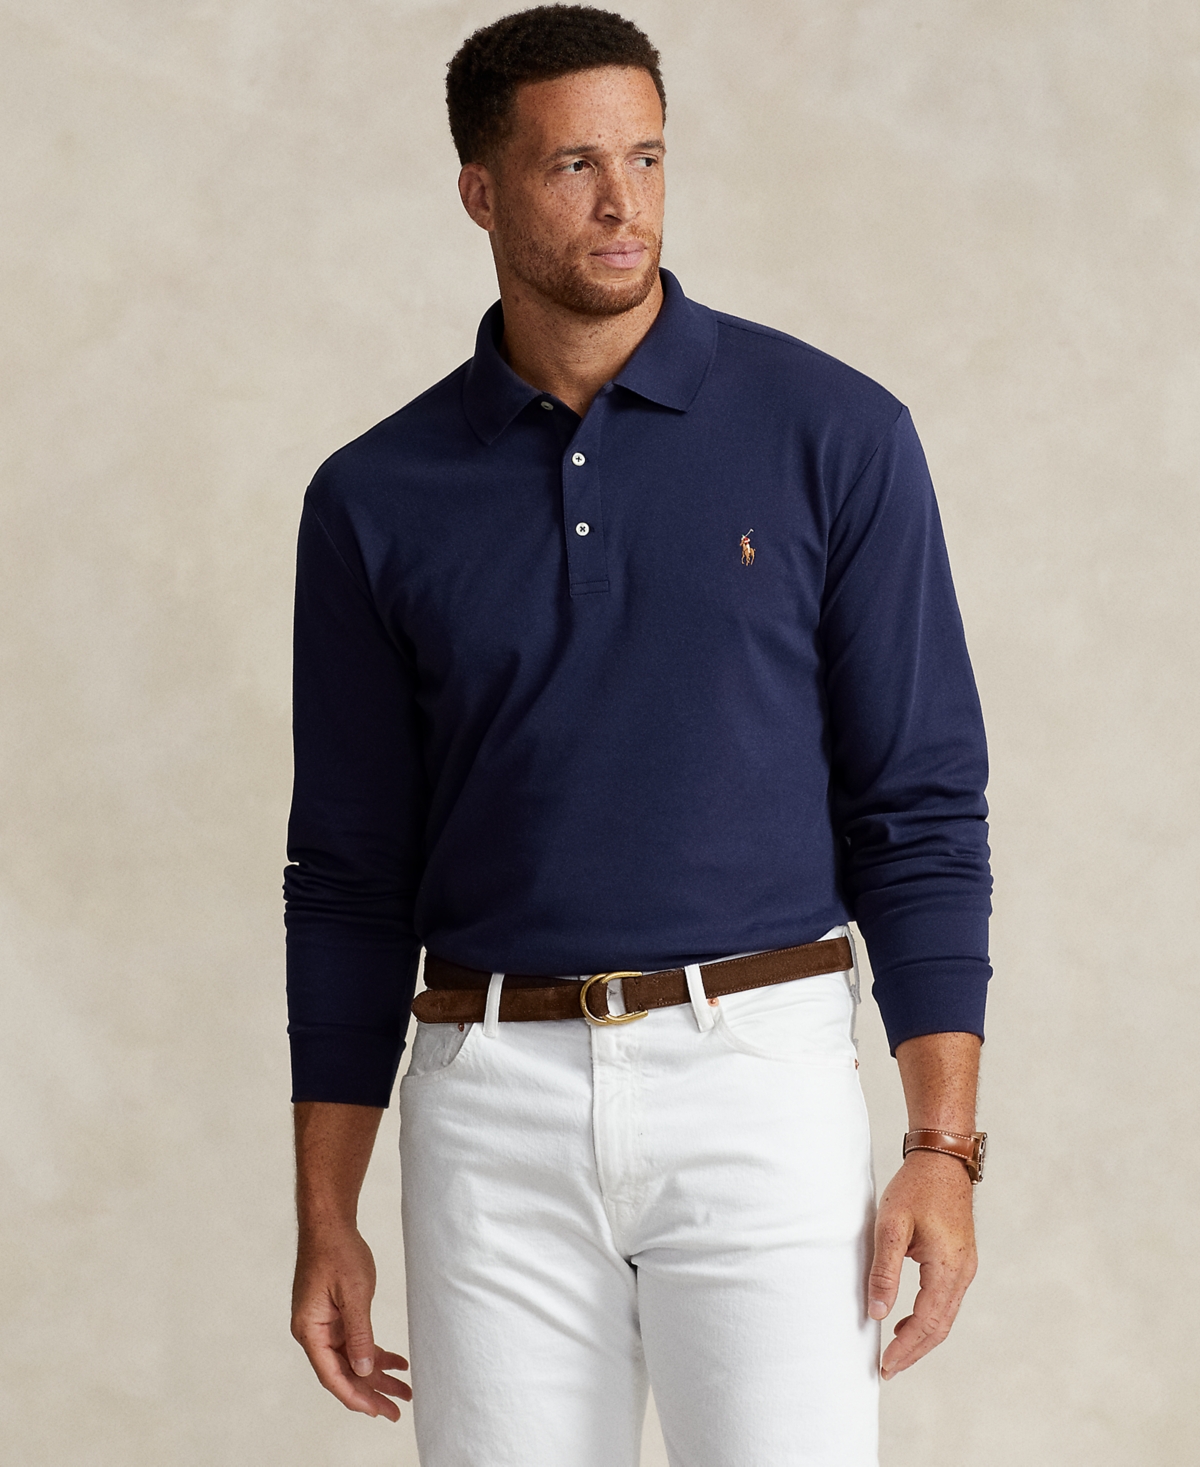 Polo Ralph Lauren Men's Big & Tall Classic Fit Soft Cotton Polo - French Navy